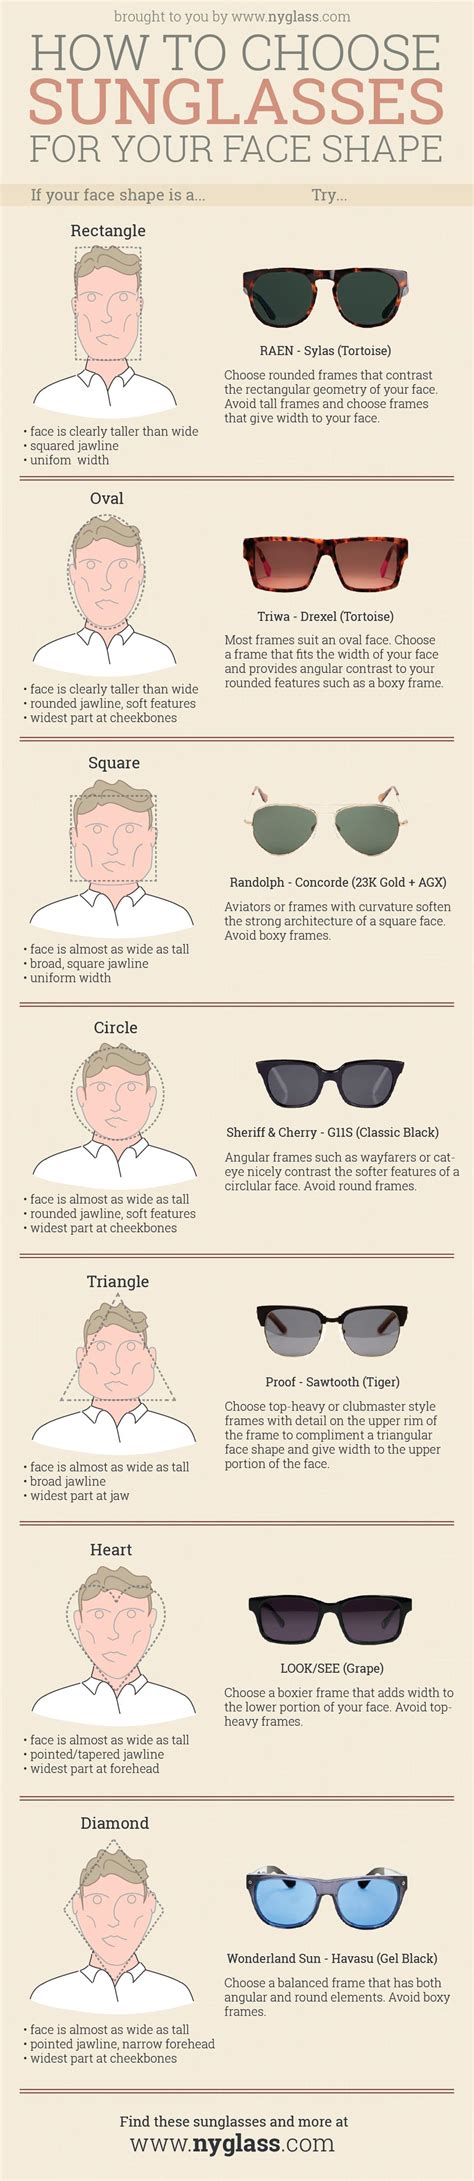 How To Choose Sunglasses For Your Face Shape Guide For